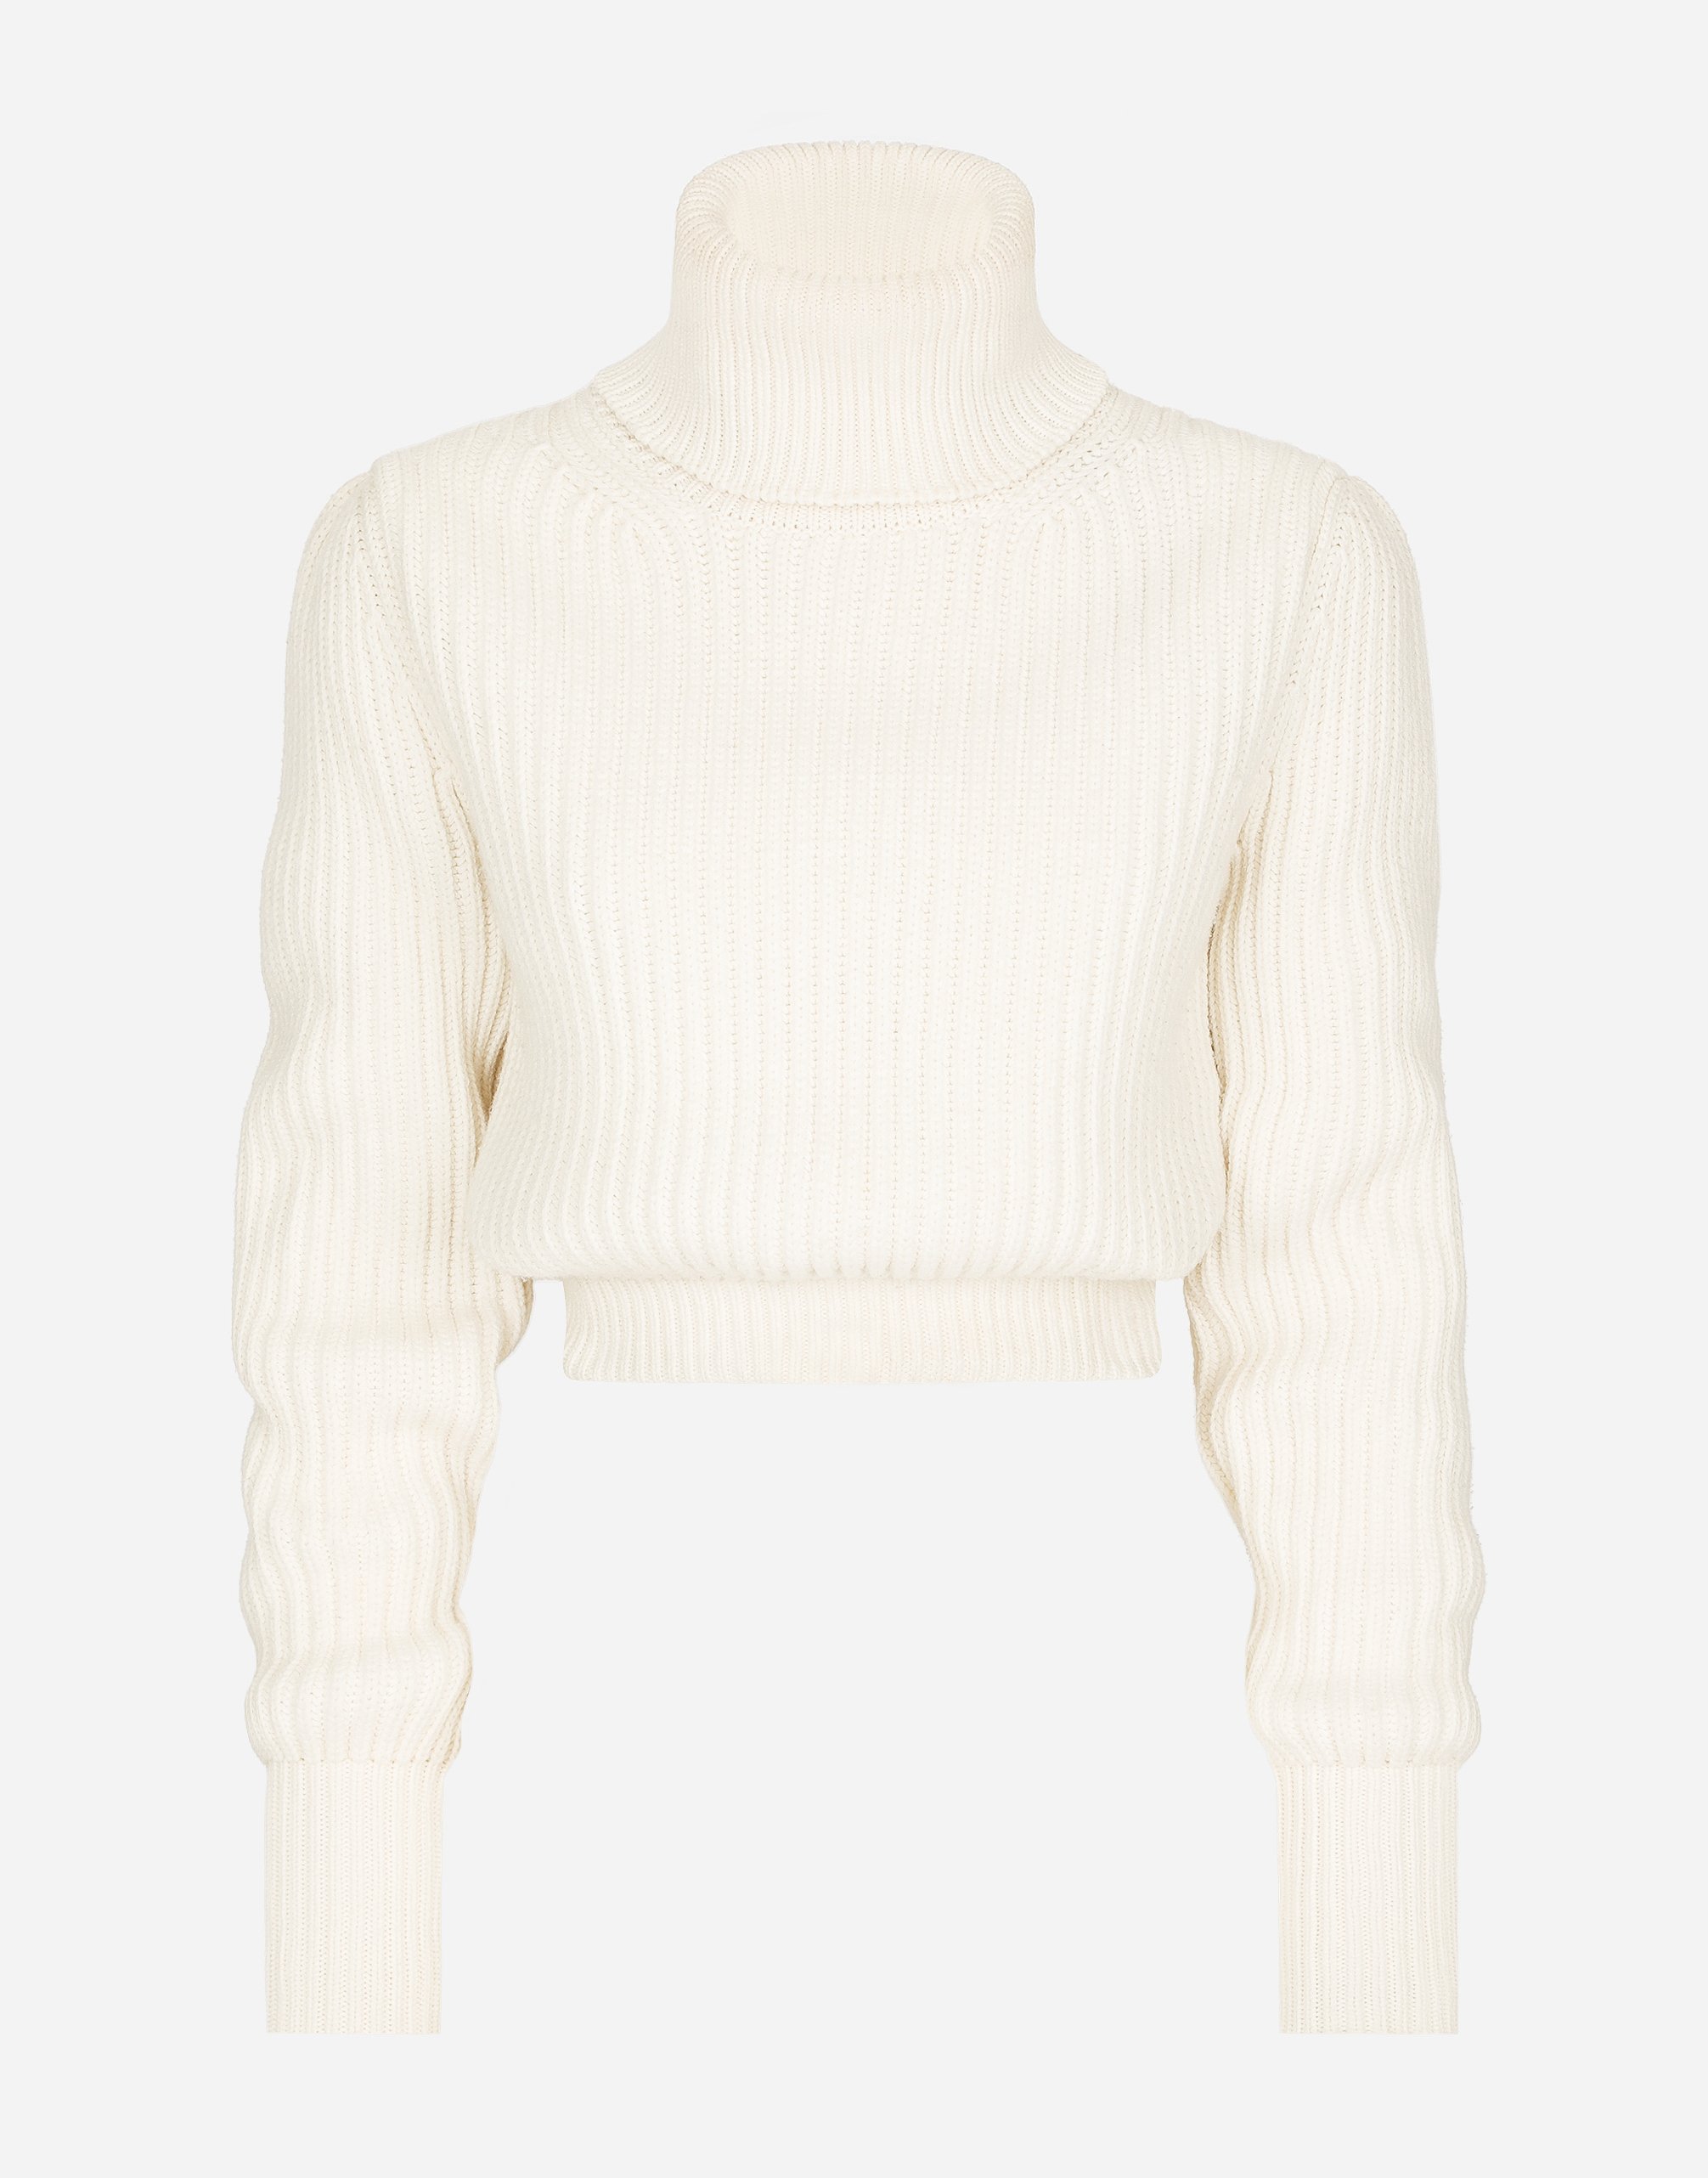 Wool fisherman's rib turtle-neck sweater with DG logo in White for